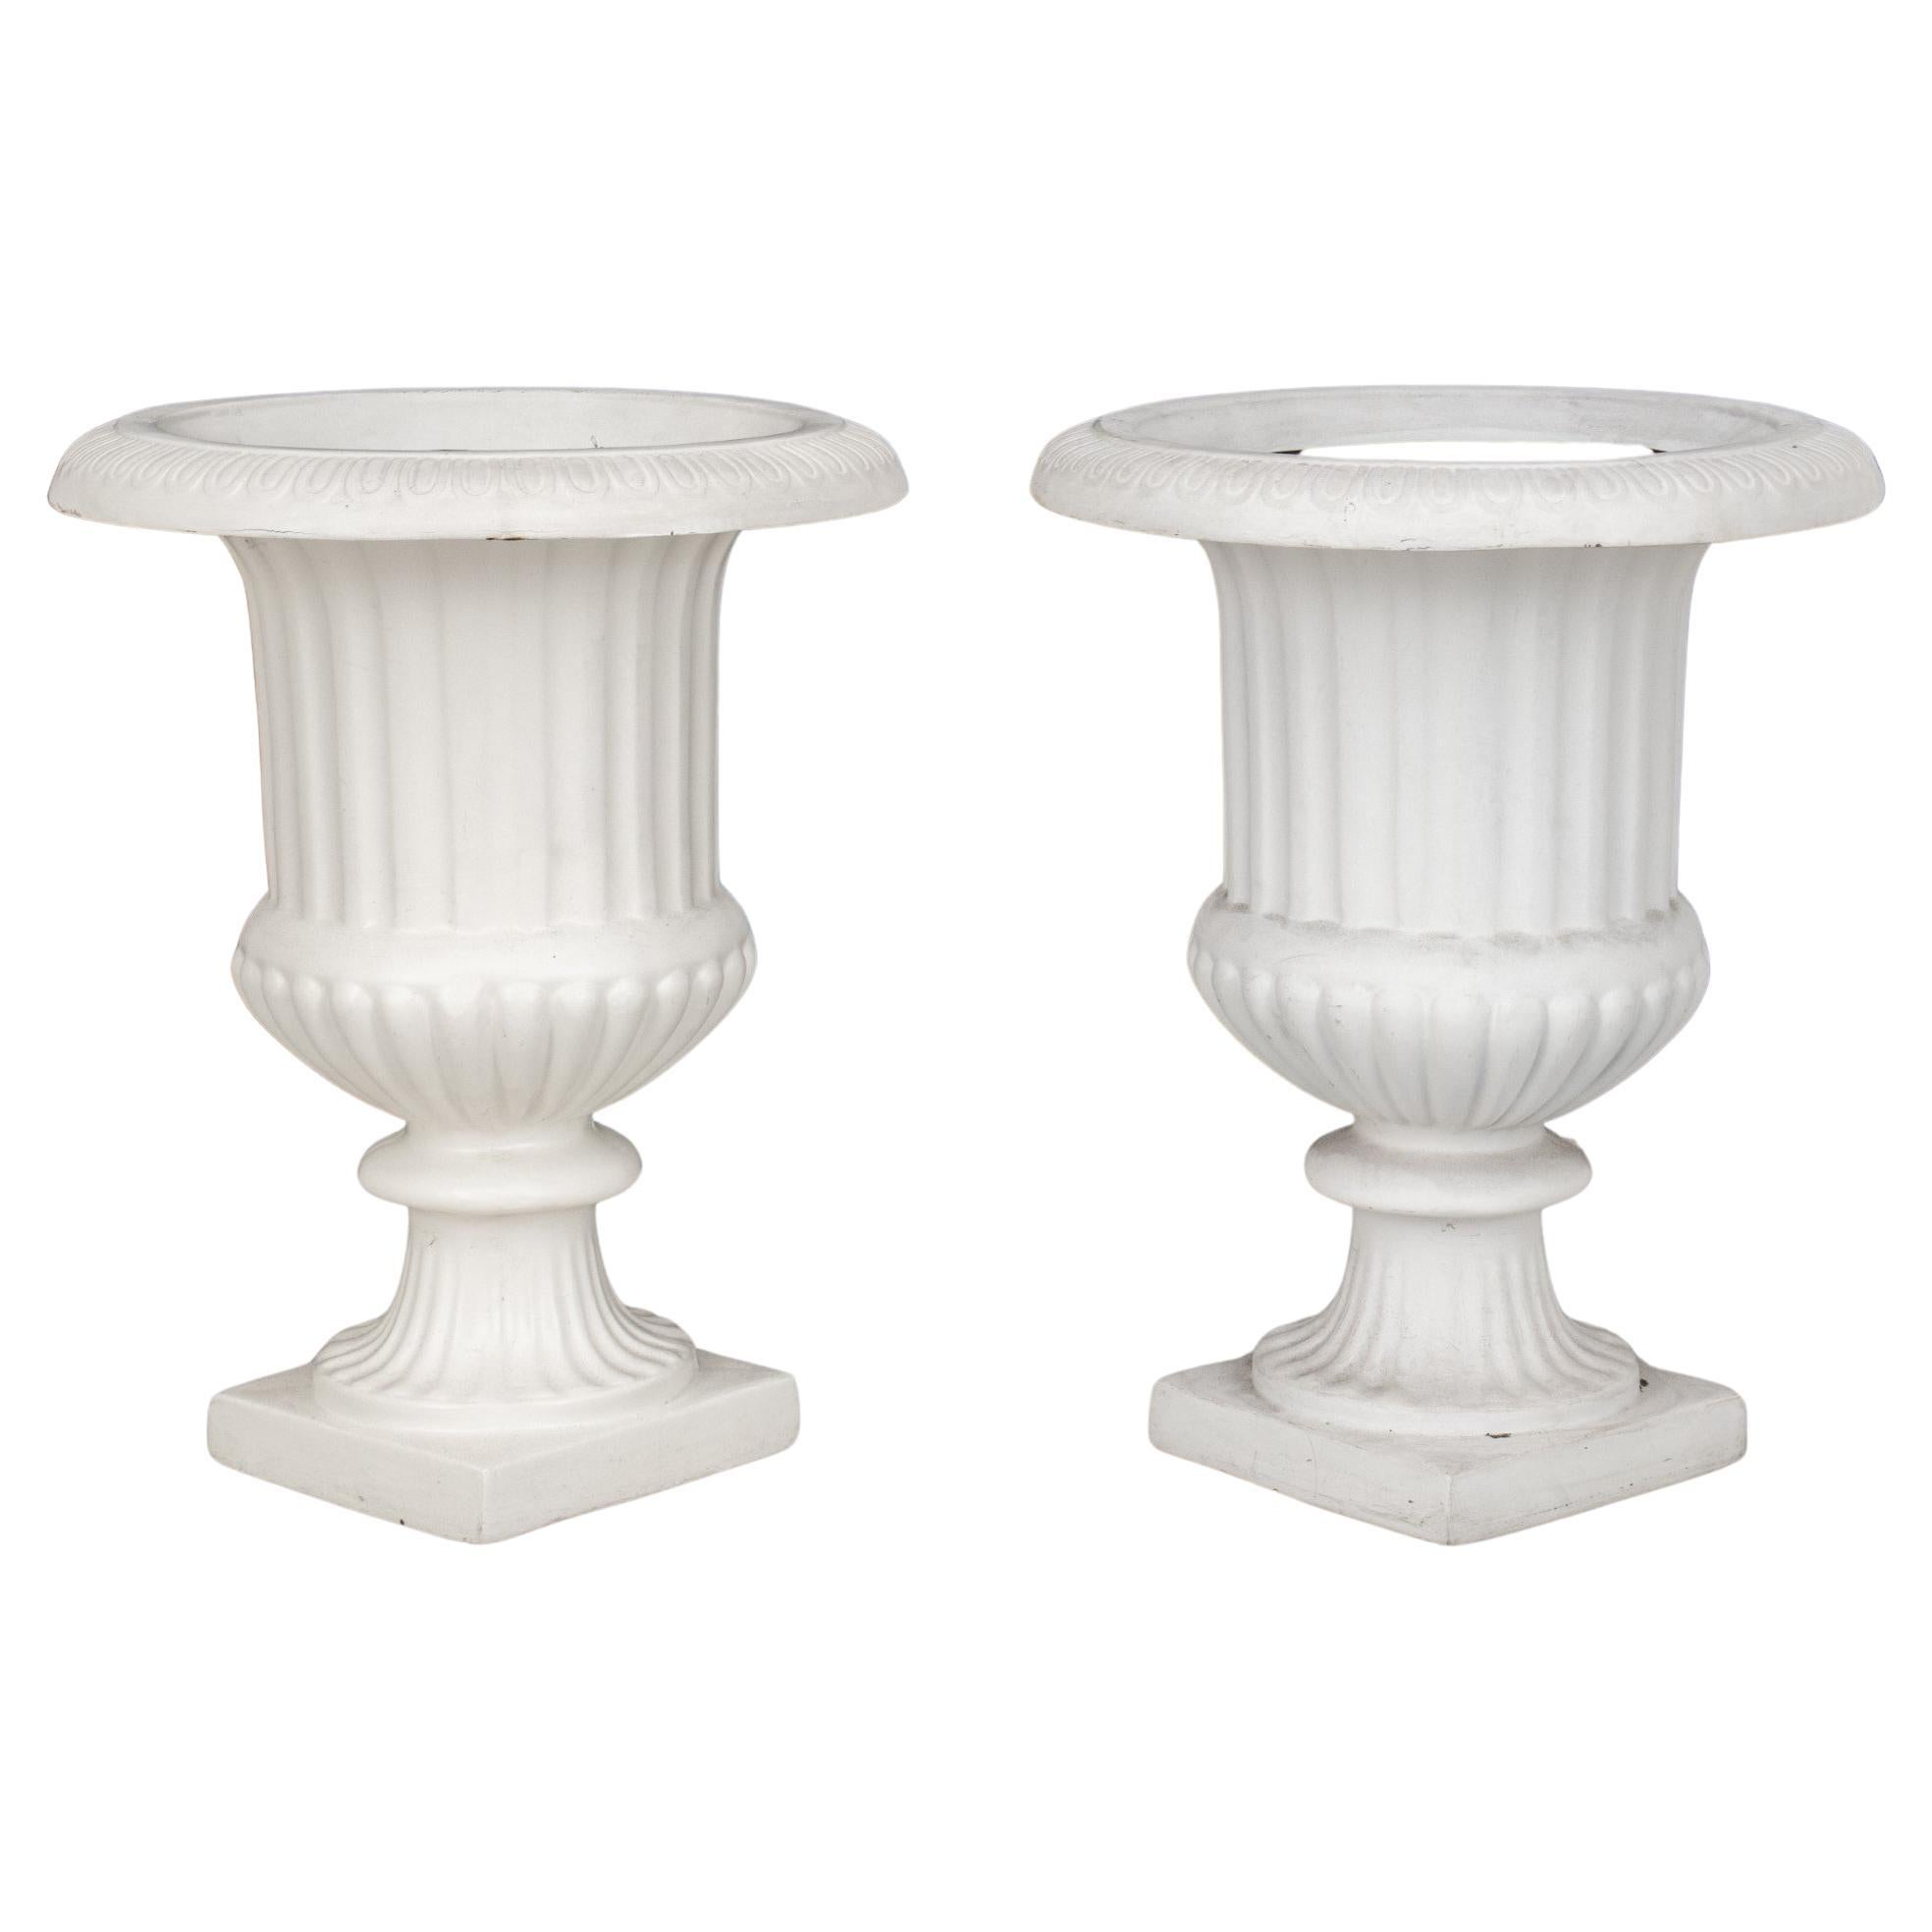 Neoclassical Style Urn Form Planters, Pair